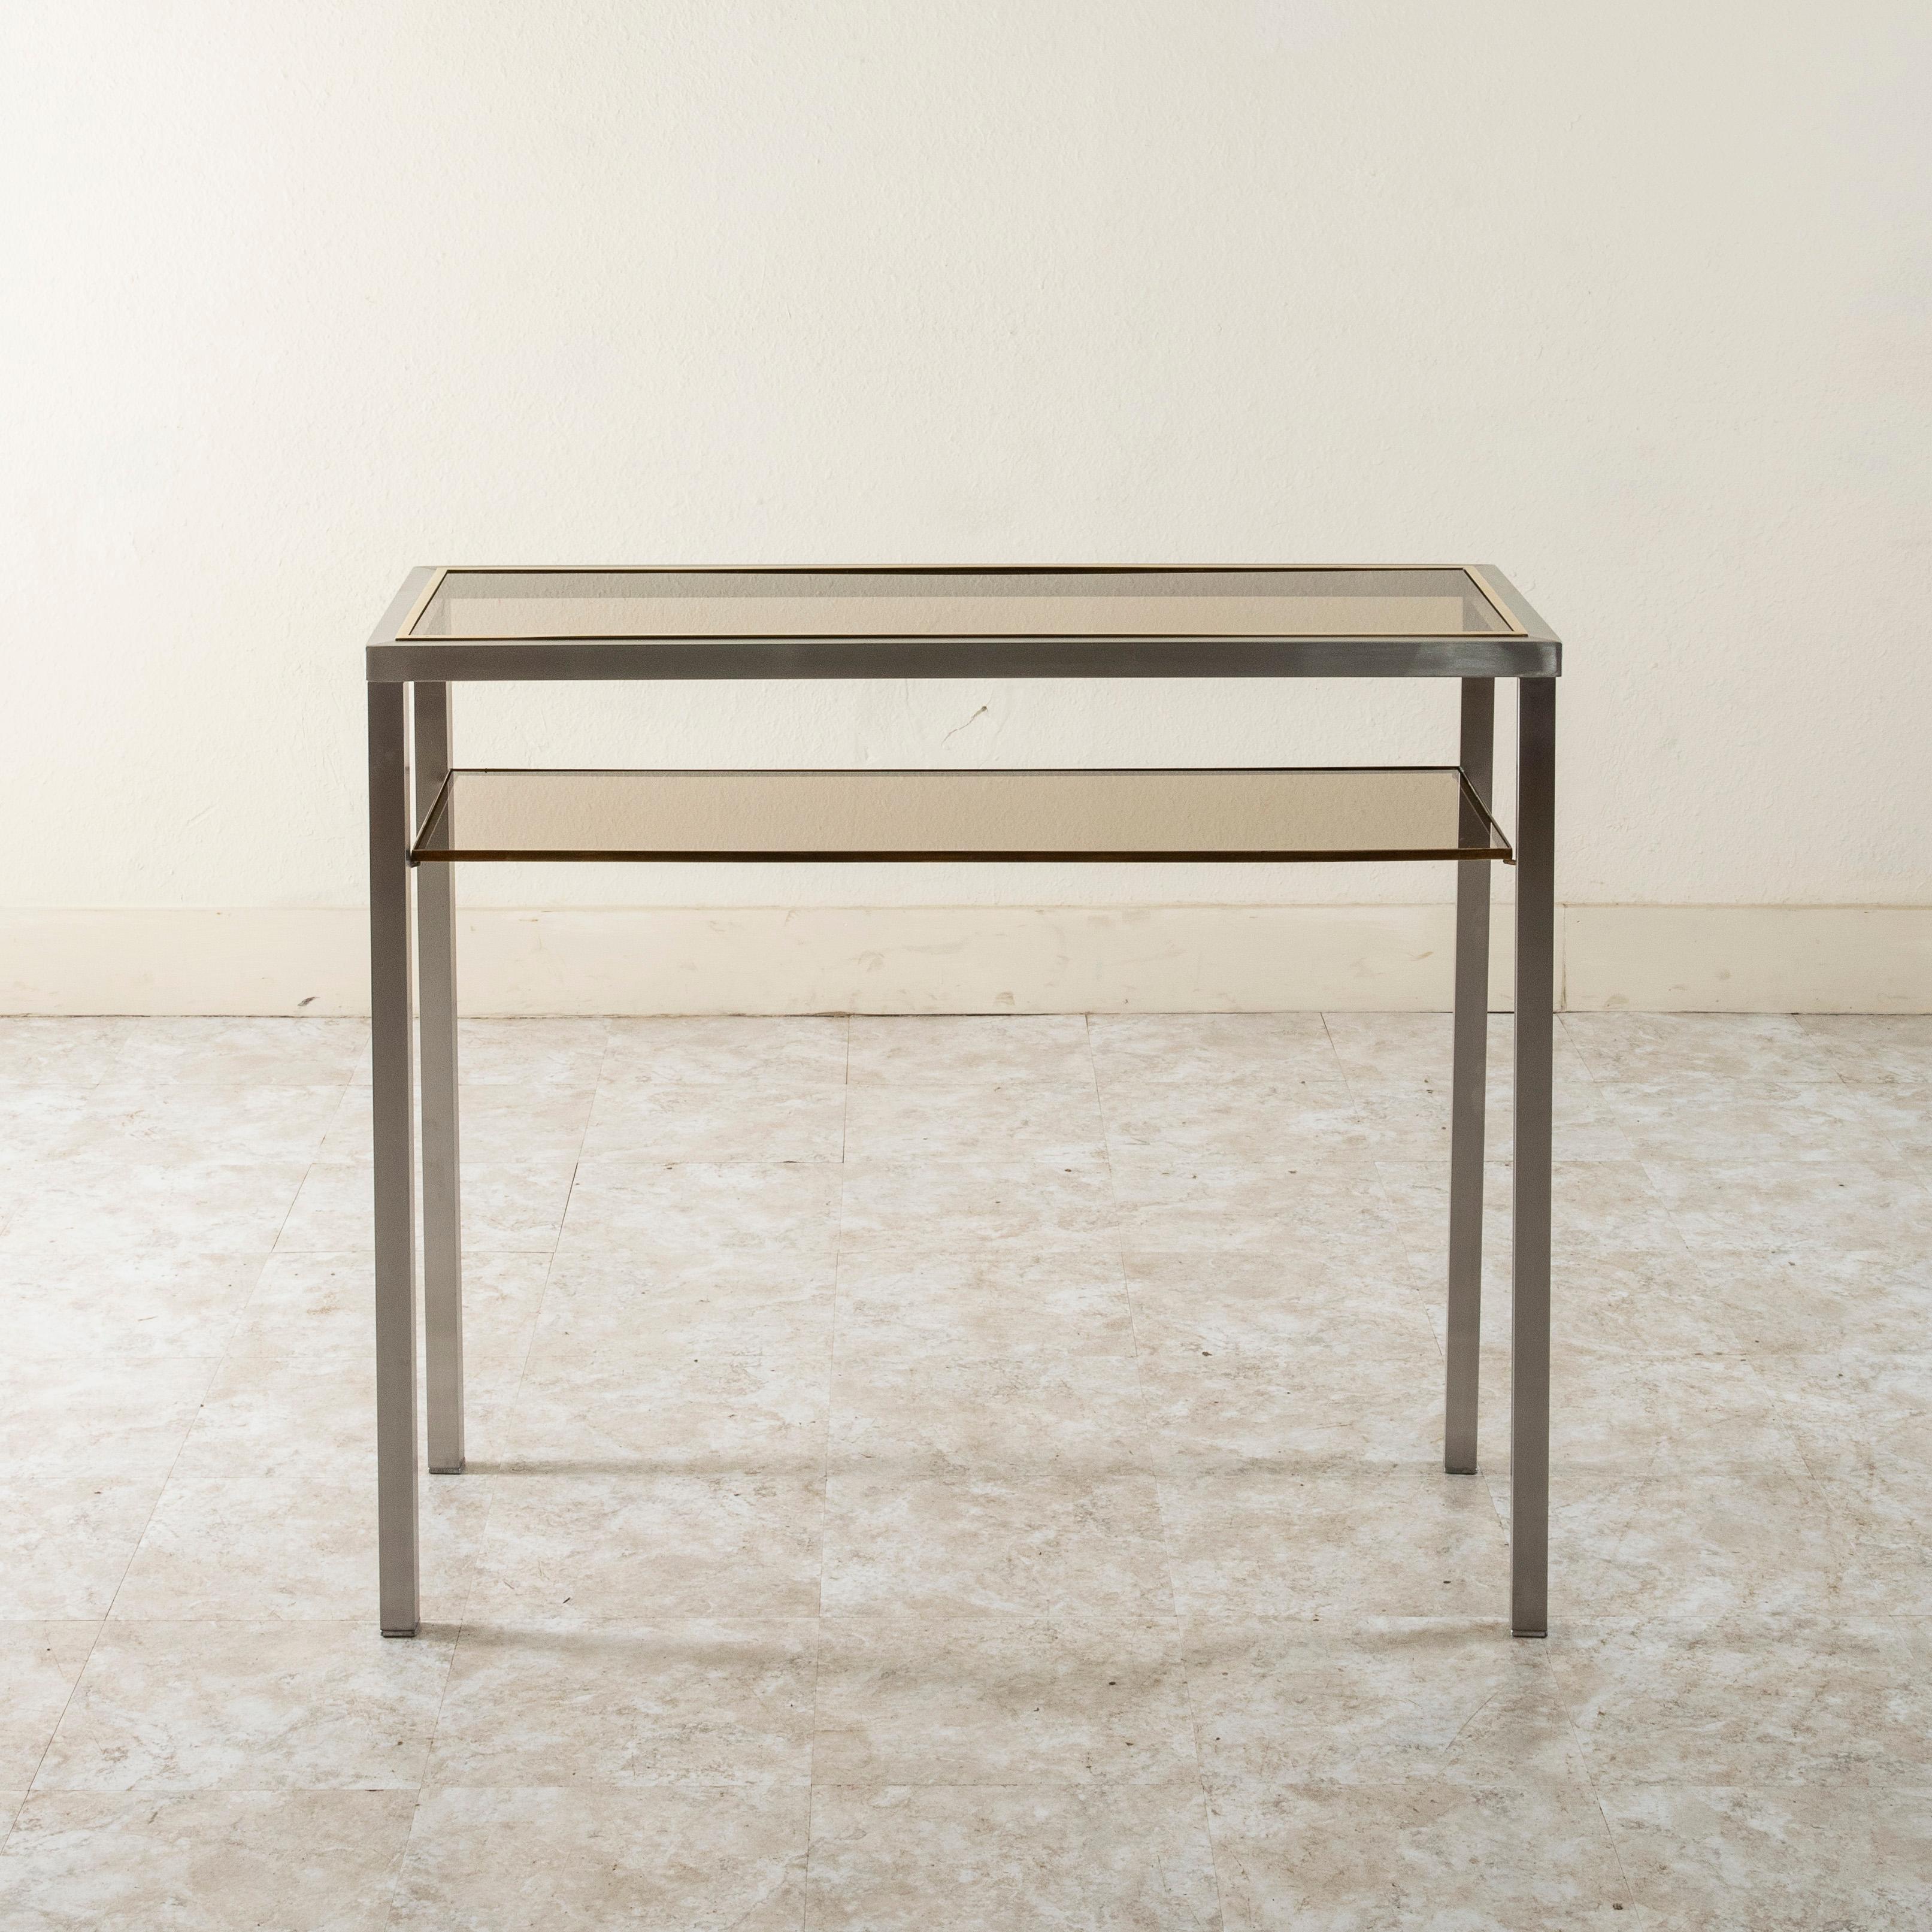 This narrow 14.5 inch deep French mid-century console table or sofa table features a sturdy steel frame and a smoked glass top. Brass trim surrounds the smoked glass on the top and around the lower smoked glass shelf. c. 1960.